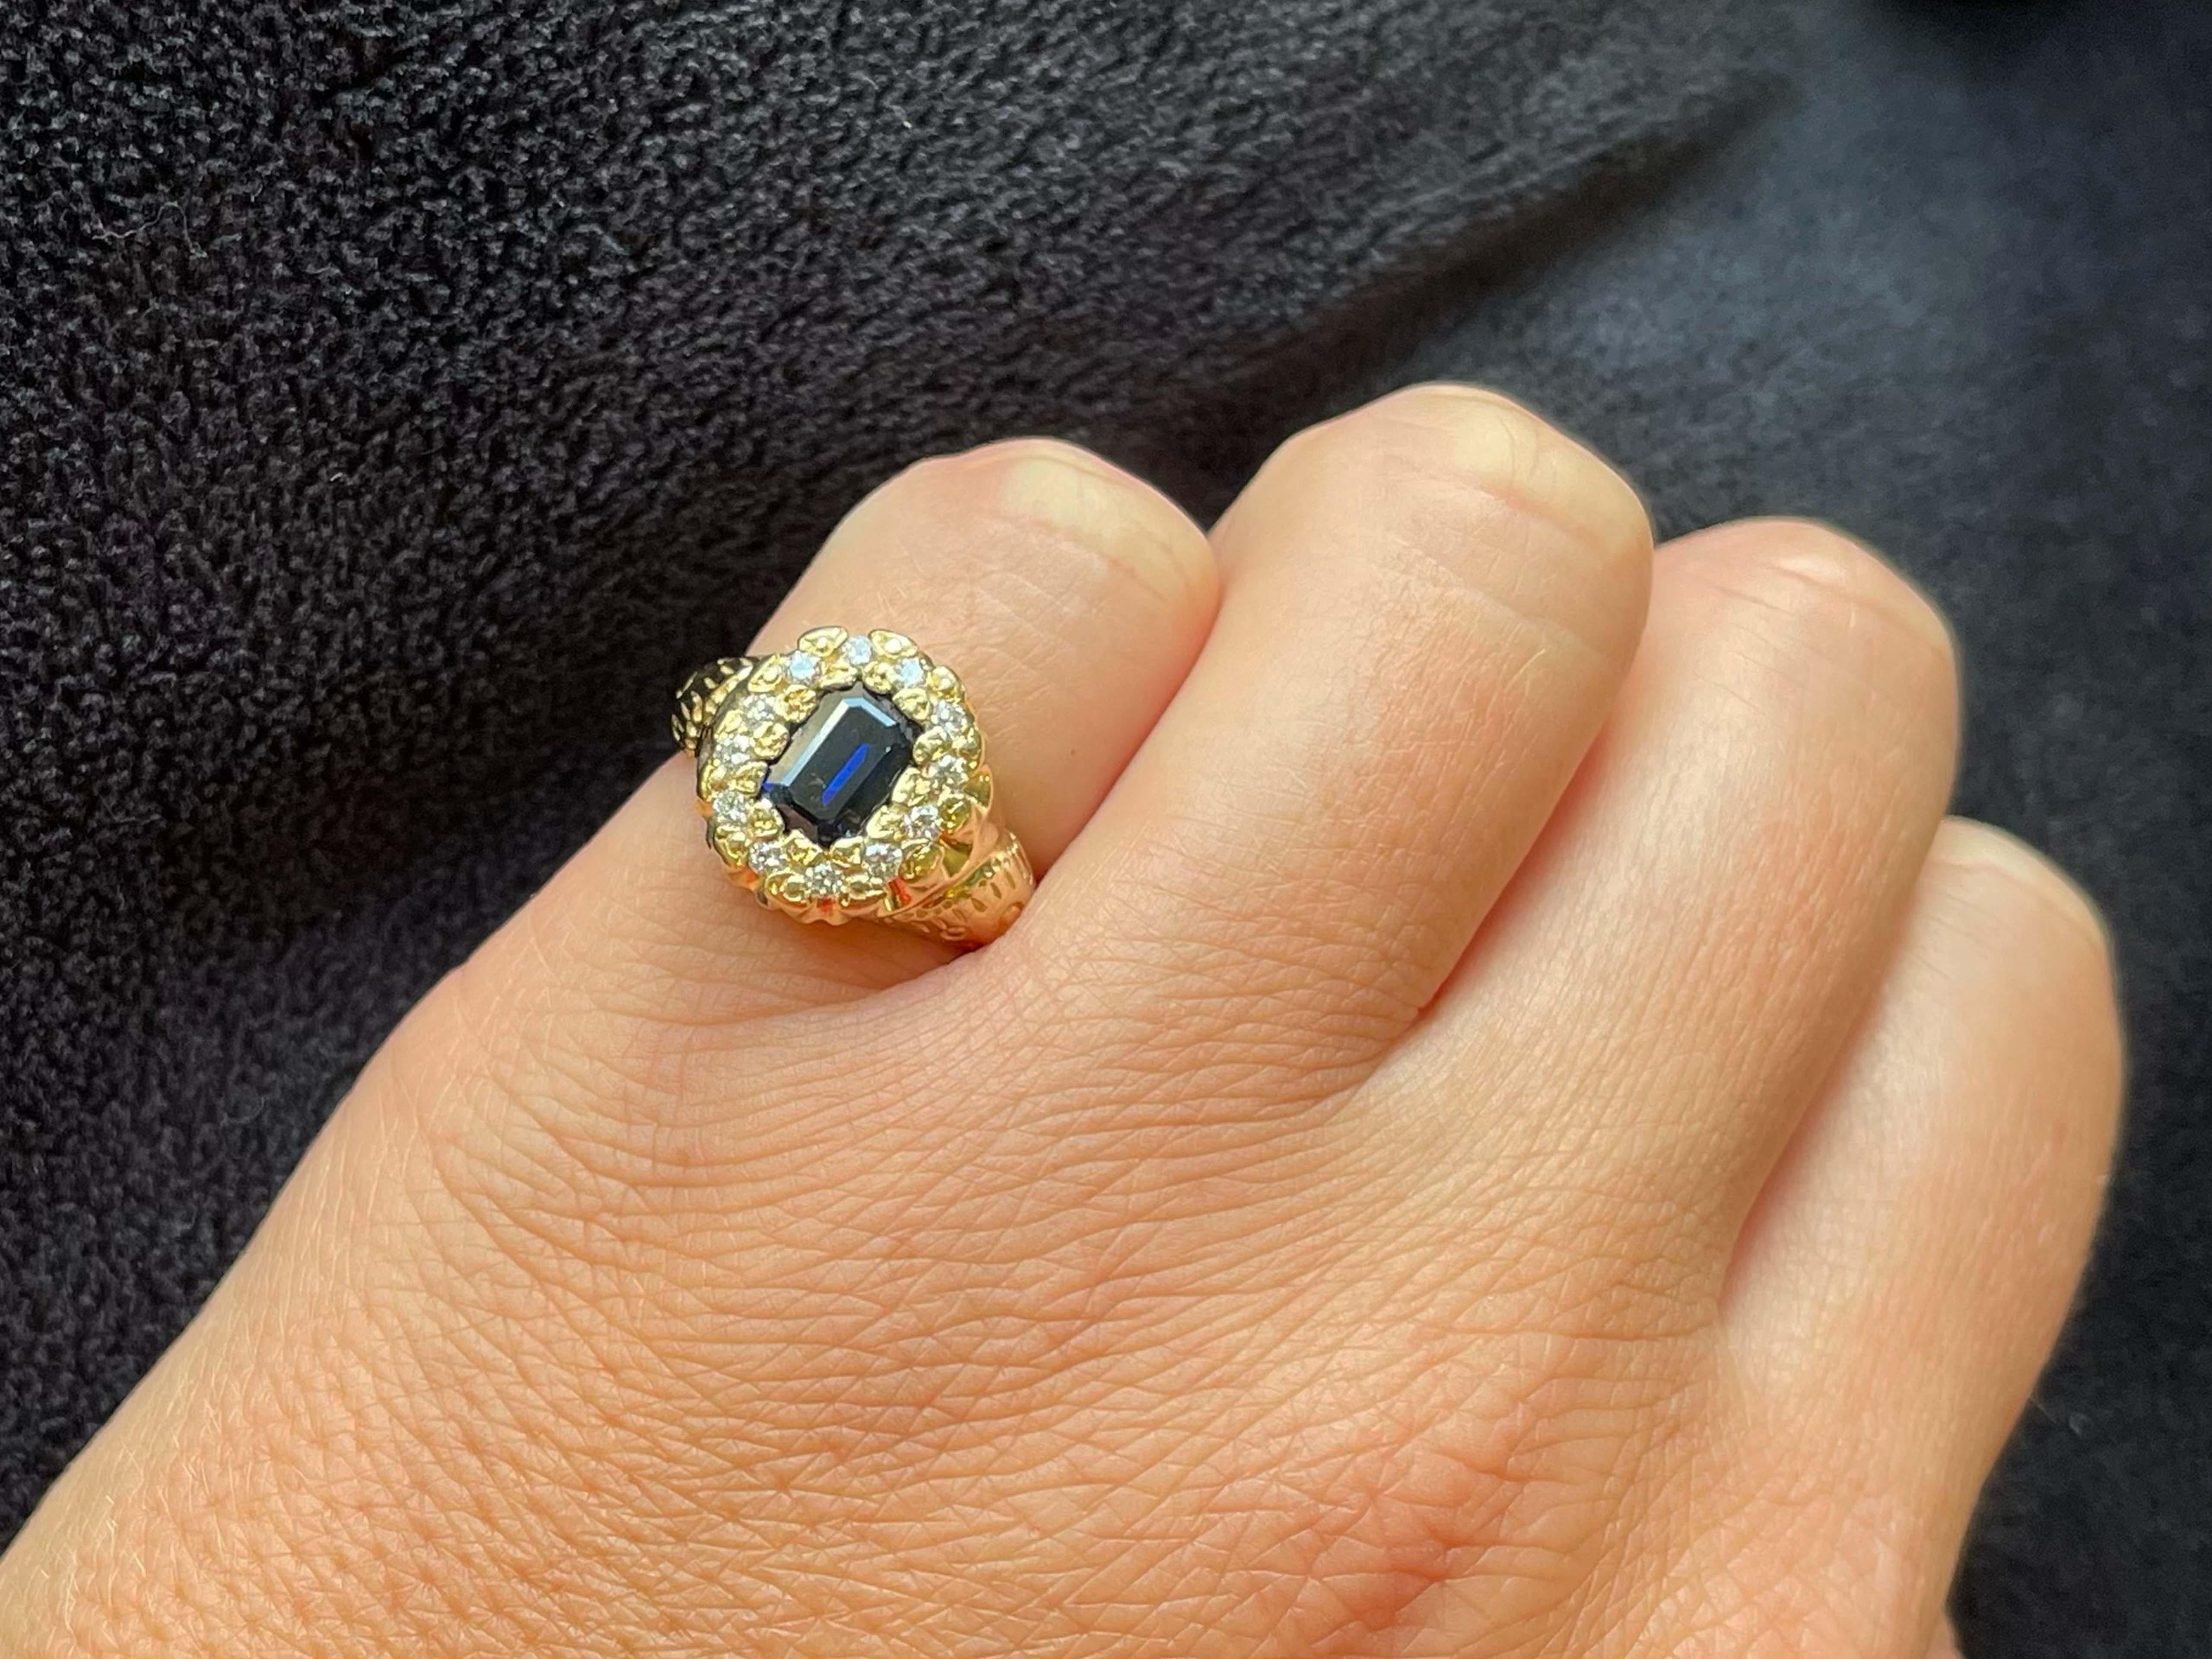 Item Specifications:

Metal: 14k Yellow Gold

Diamond Count: 12 diamonds

Diamond Carat Weight: 0.24

Diamond Color: G

Diamond Clarity: VS2-SI1
​
​Sapphire Measurements: 7.41 mm x 5.56 mm x 3.17 mm

Sapphire Carat Weight: ~1.33

Sapphire Count: 1